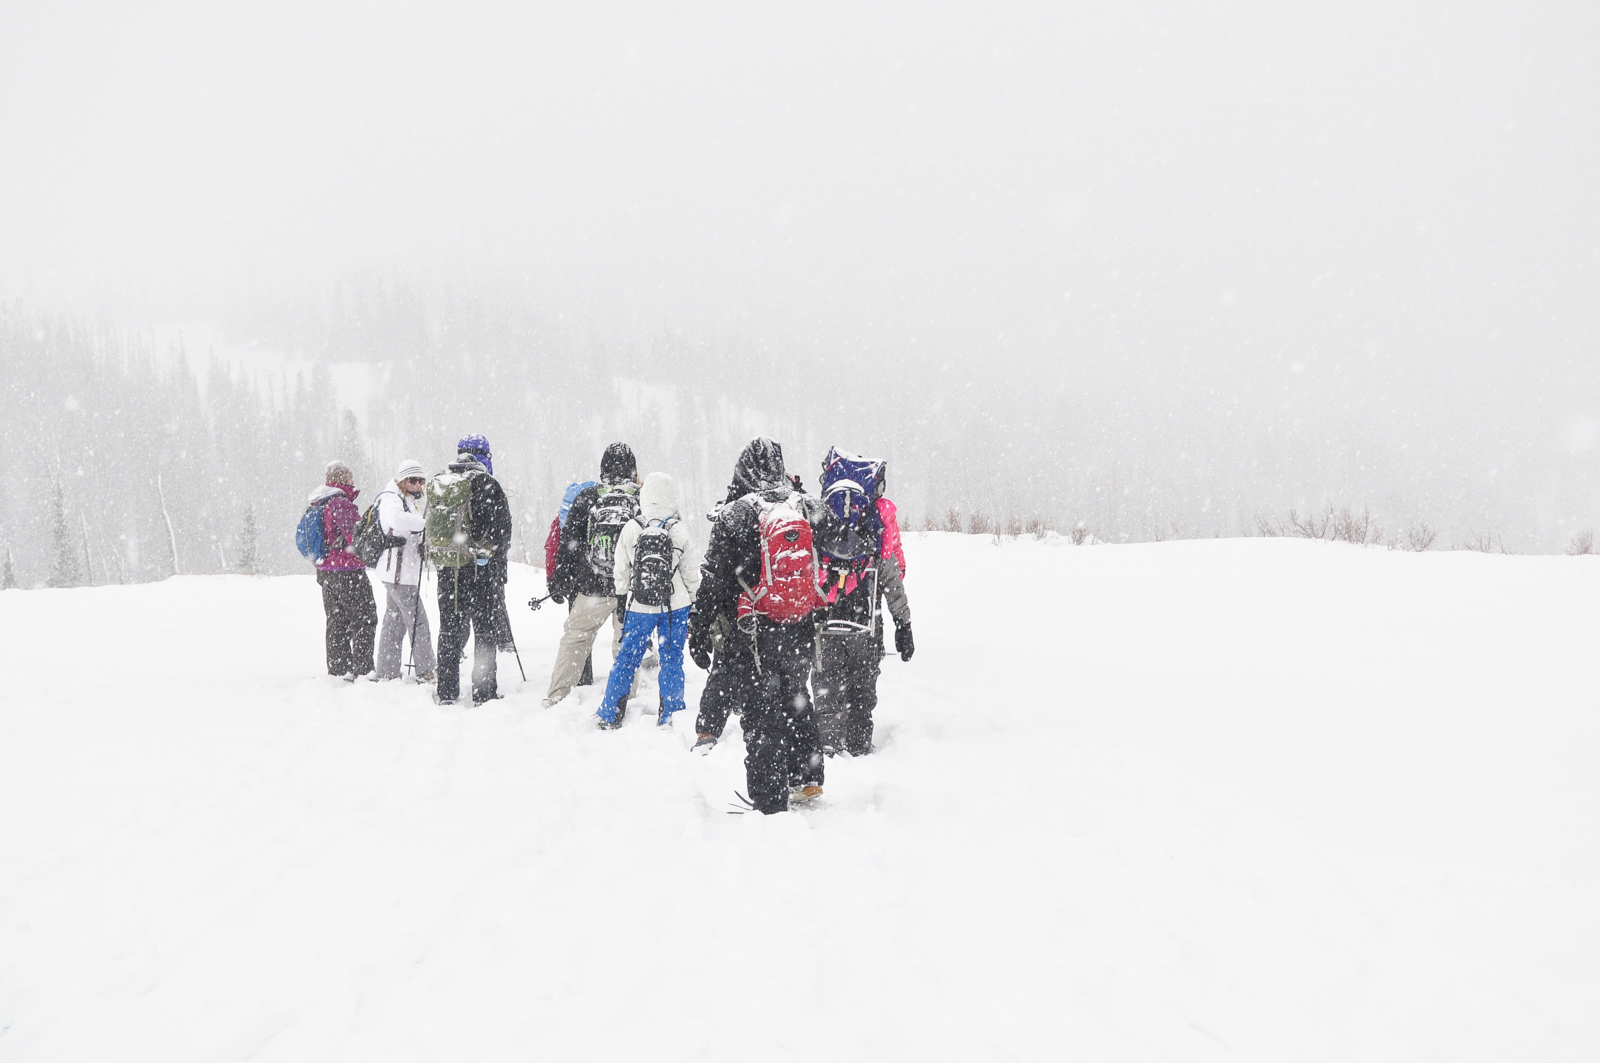 Group of visitors on snowshoe tour in wintry blizzard conditions